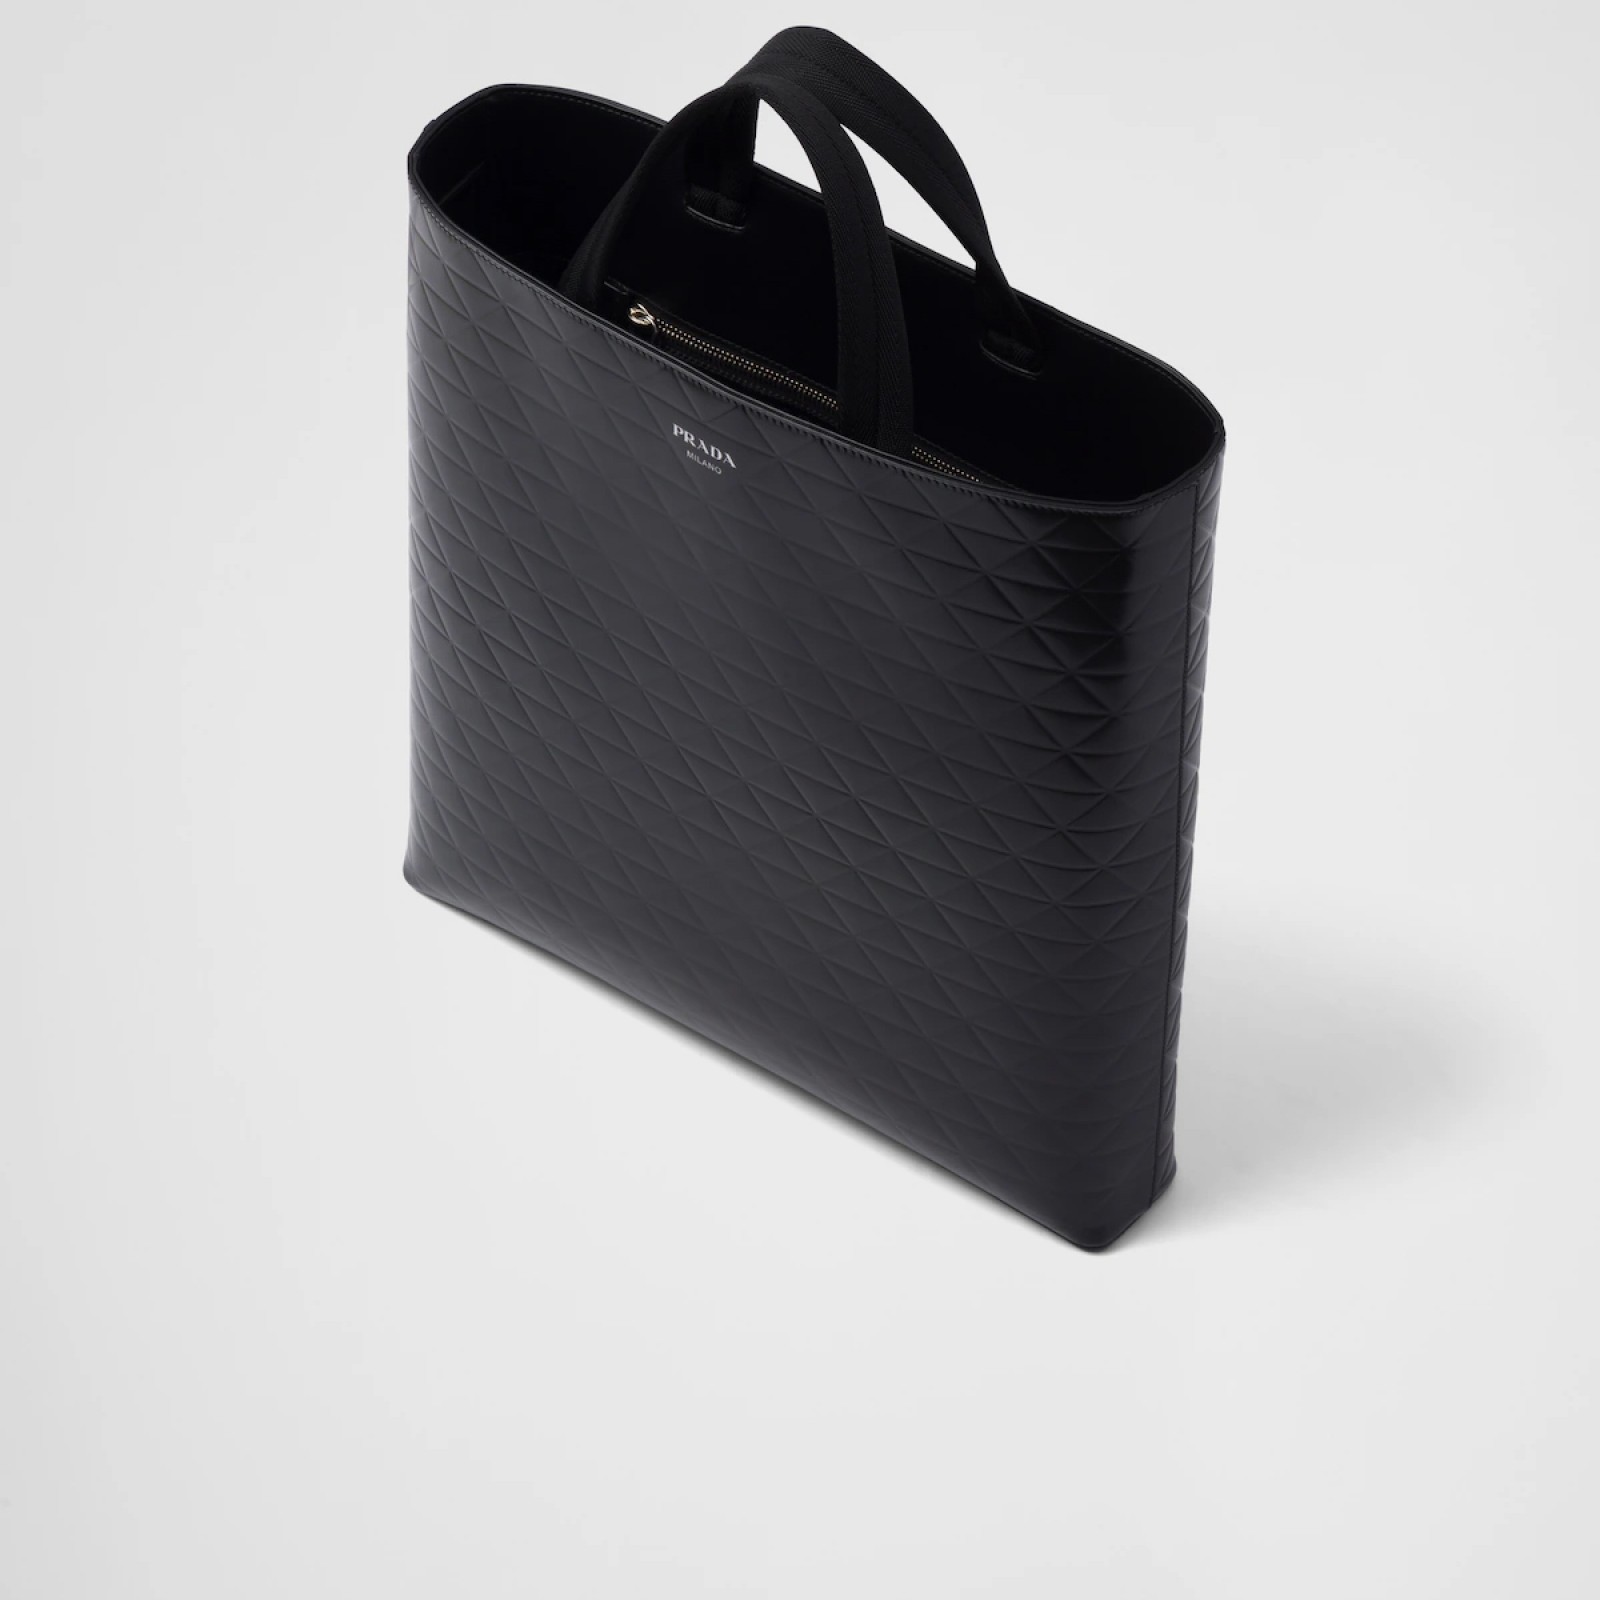 Brushed leather tote bag with water bottle